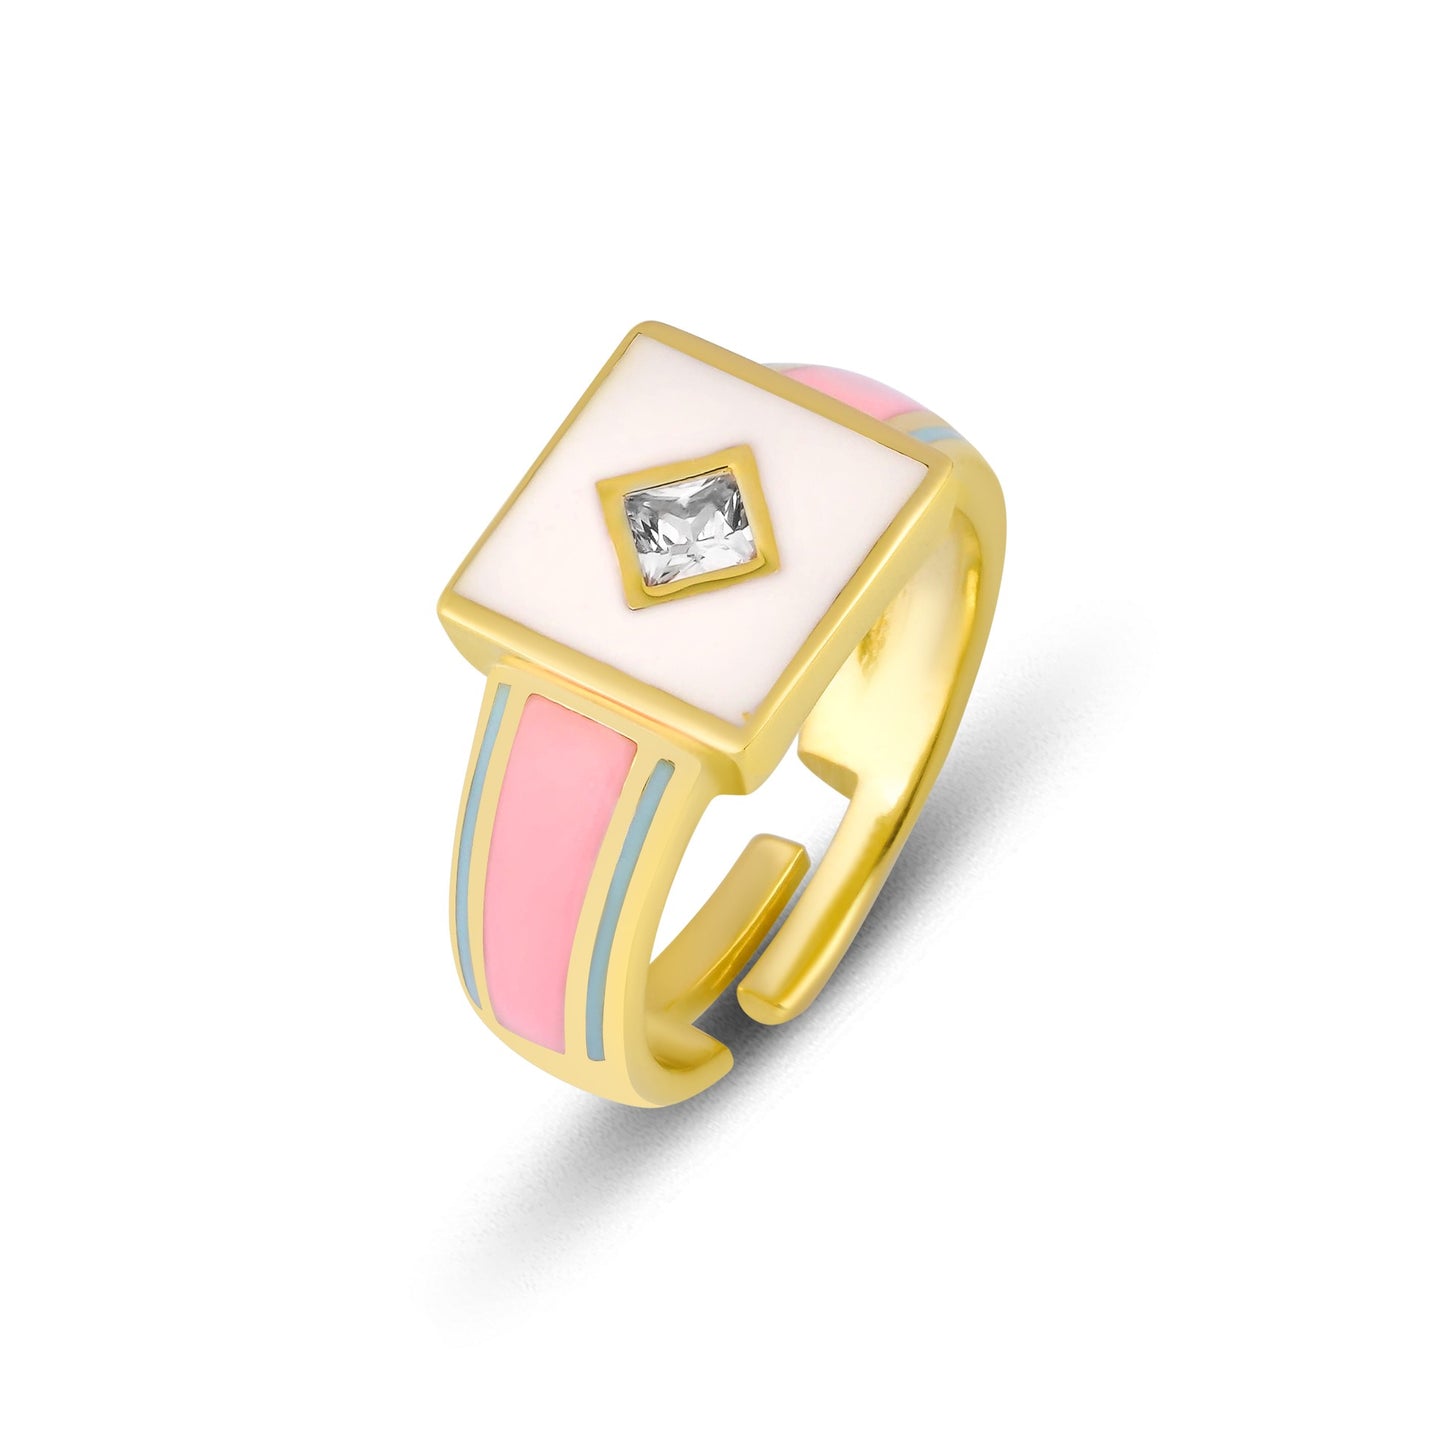 Enameled Colorful Square Adjustable Silver Ring